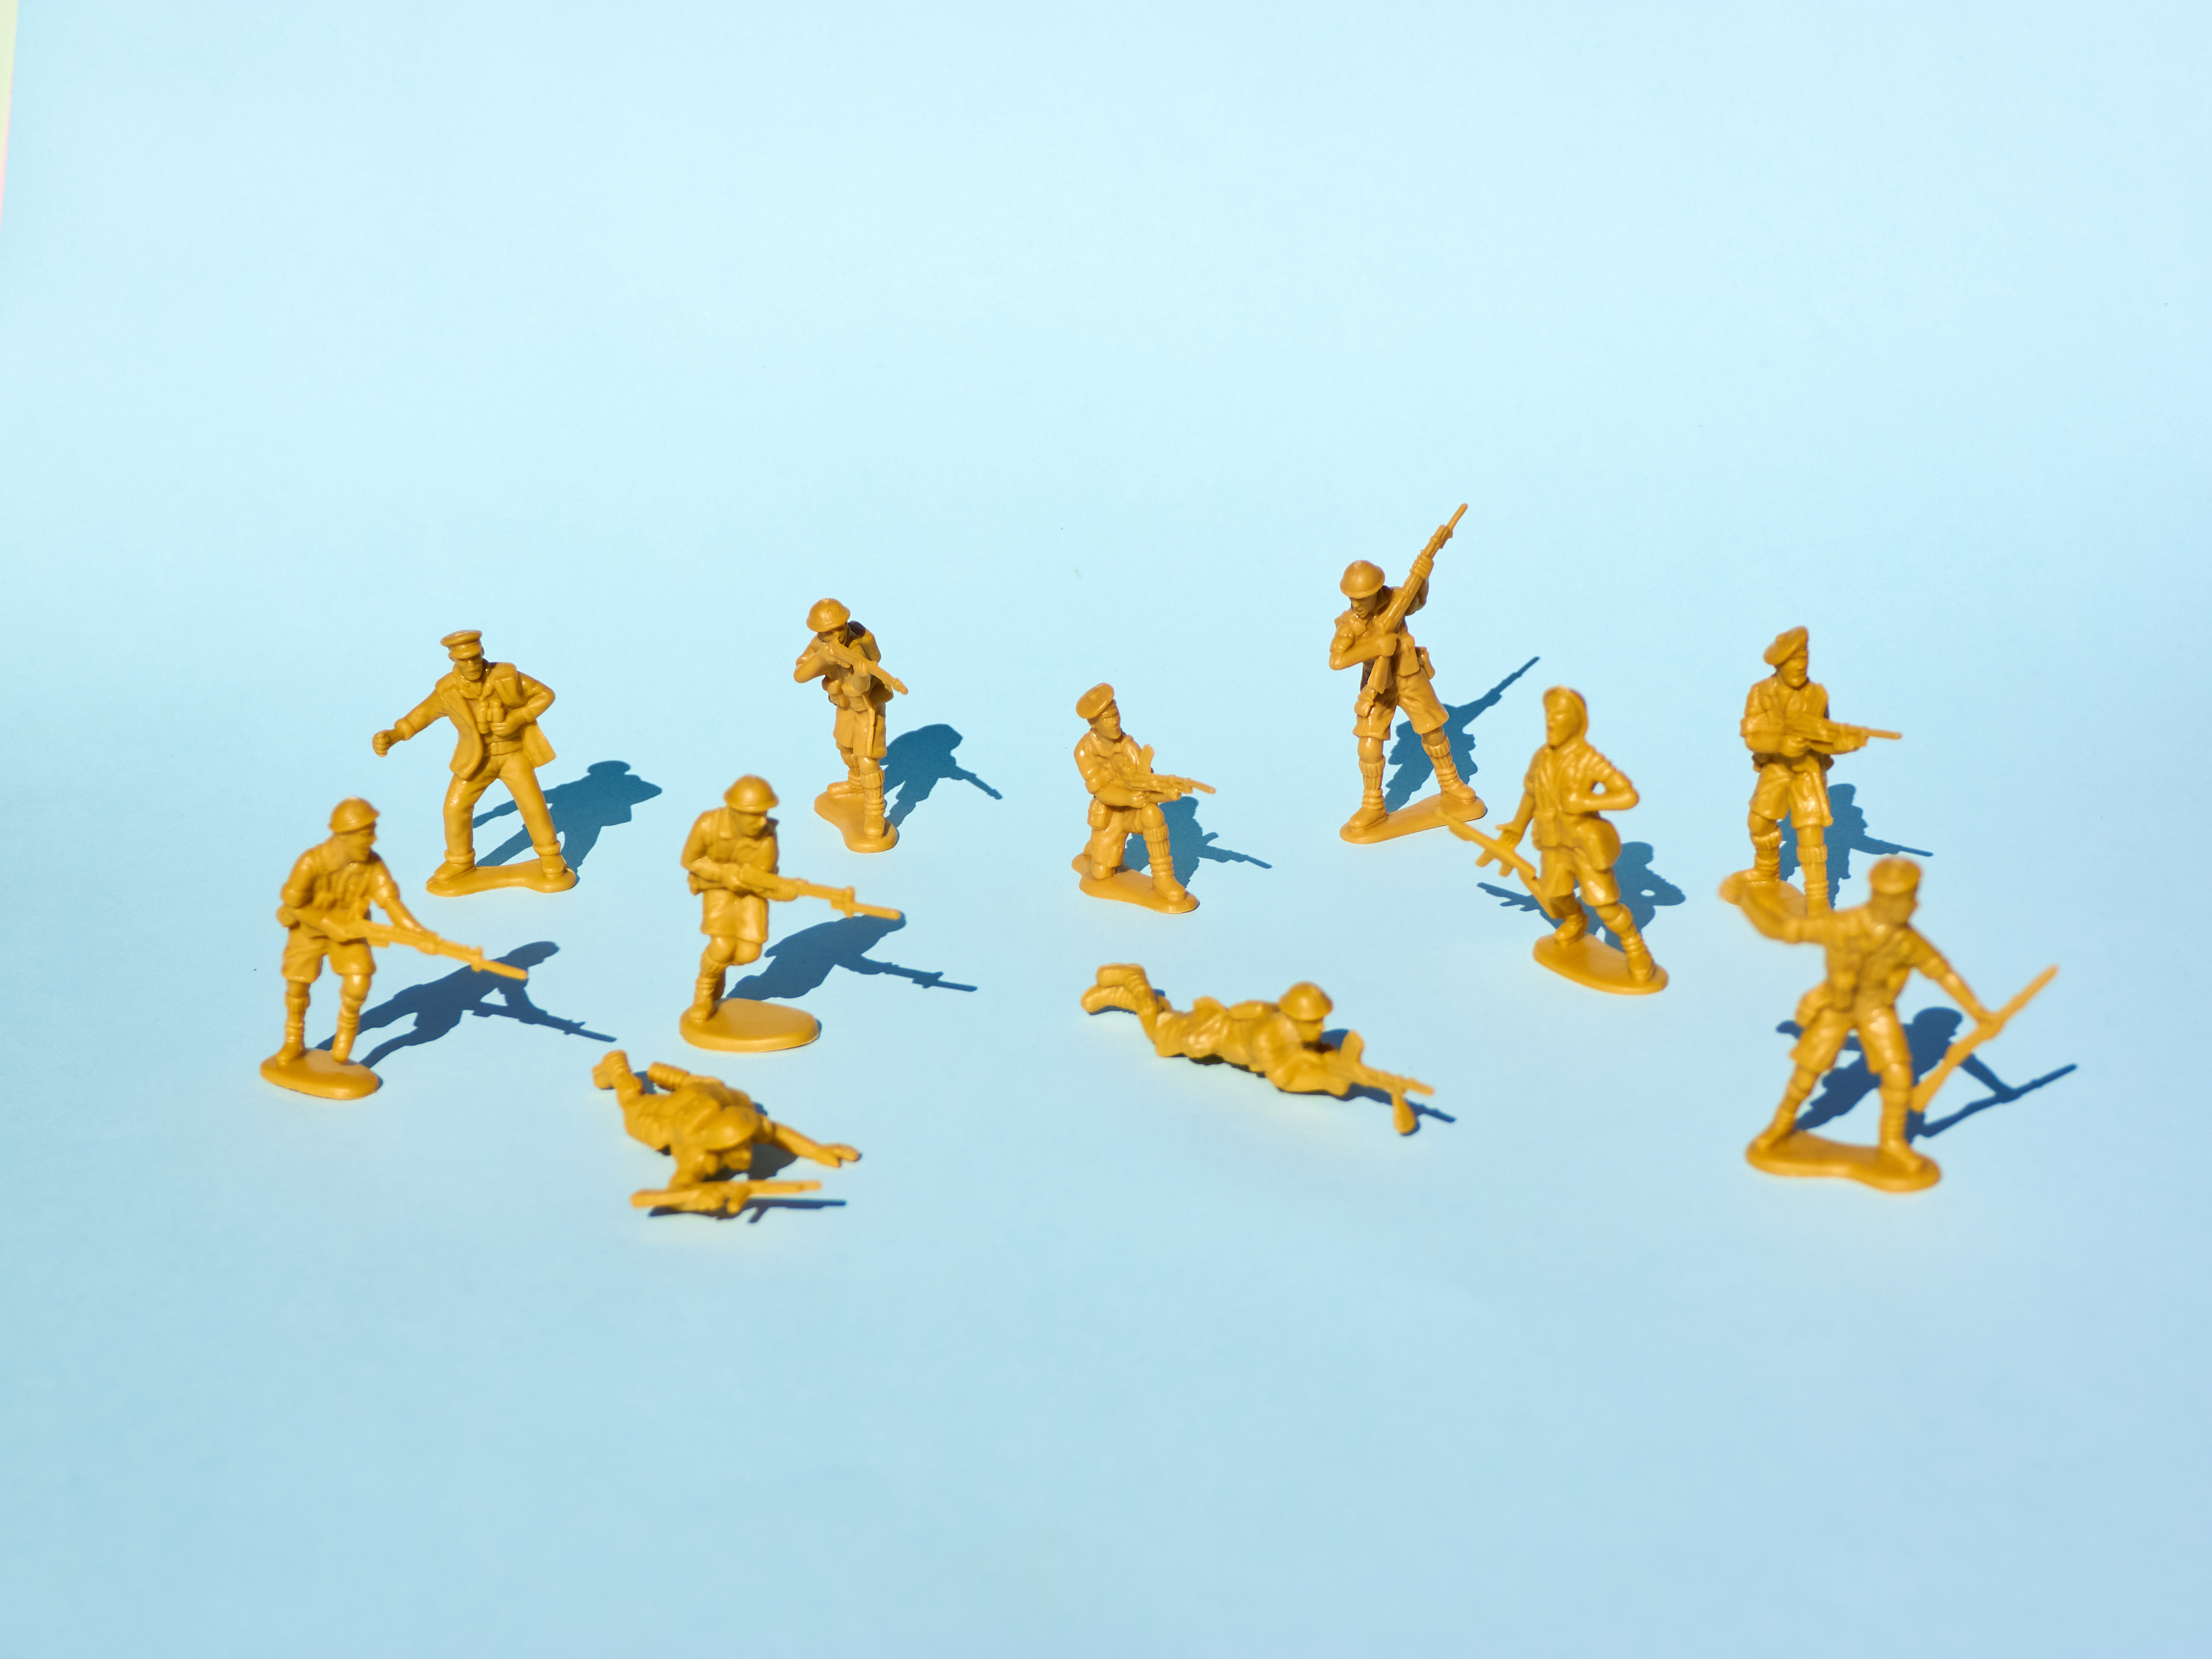 Image of a group of yellow plastic toy soldiers pointing guns at each other on a blue background.